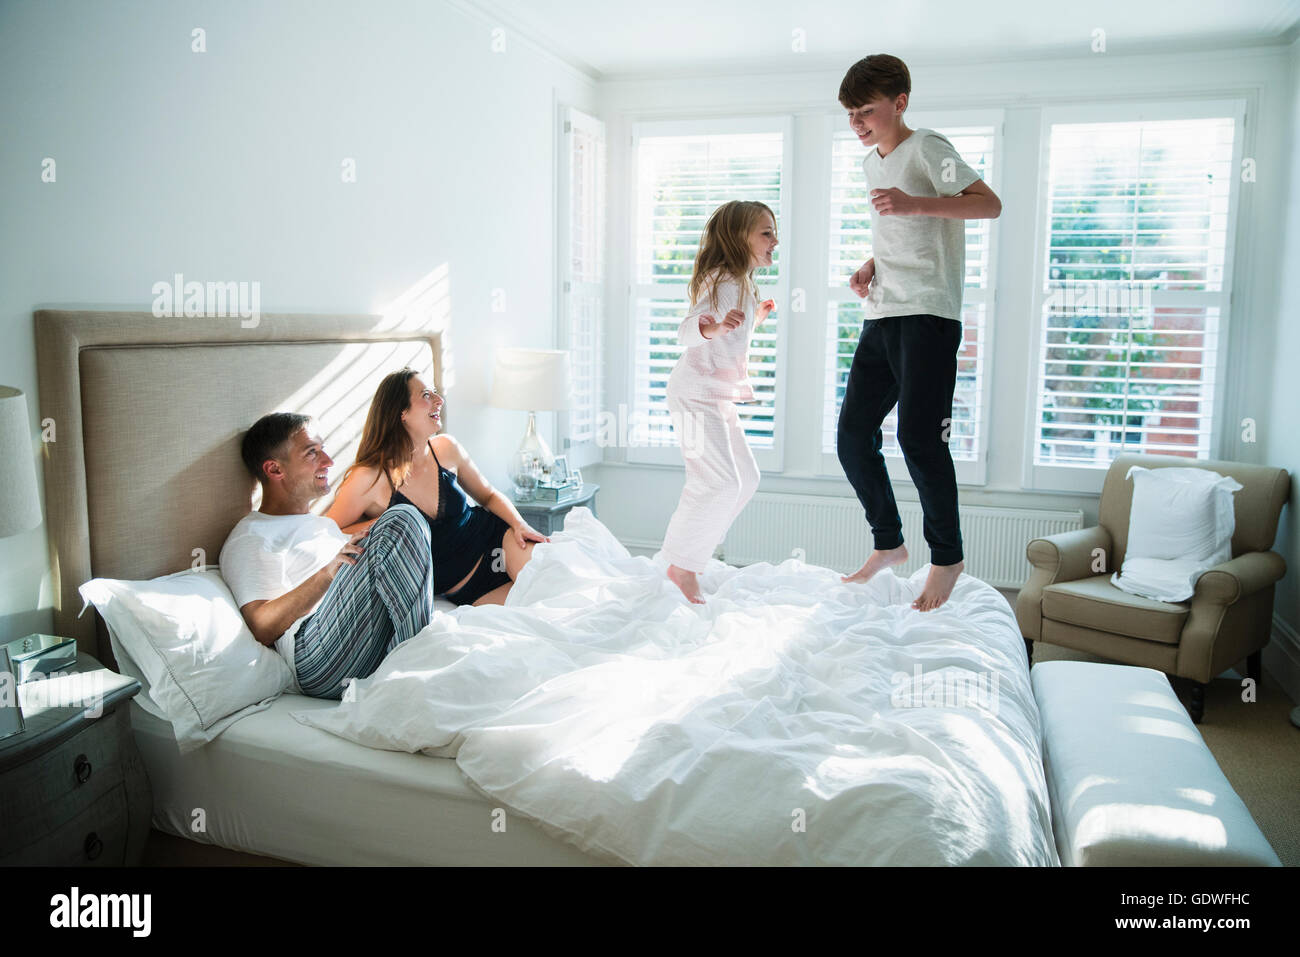 Parents watching children jumping on bed Stock Photo